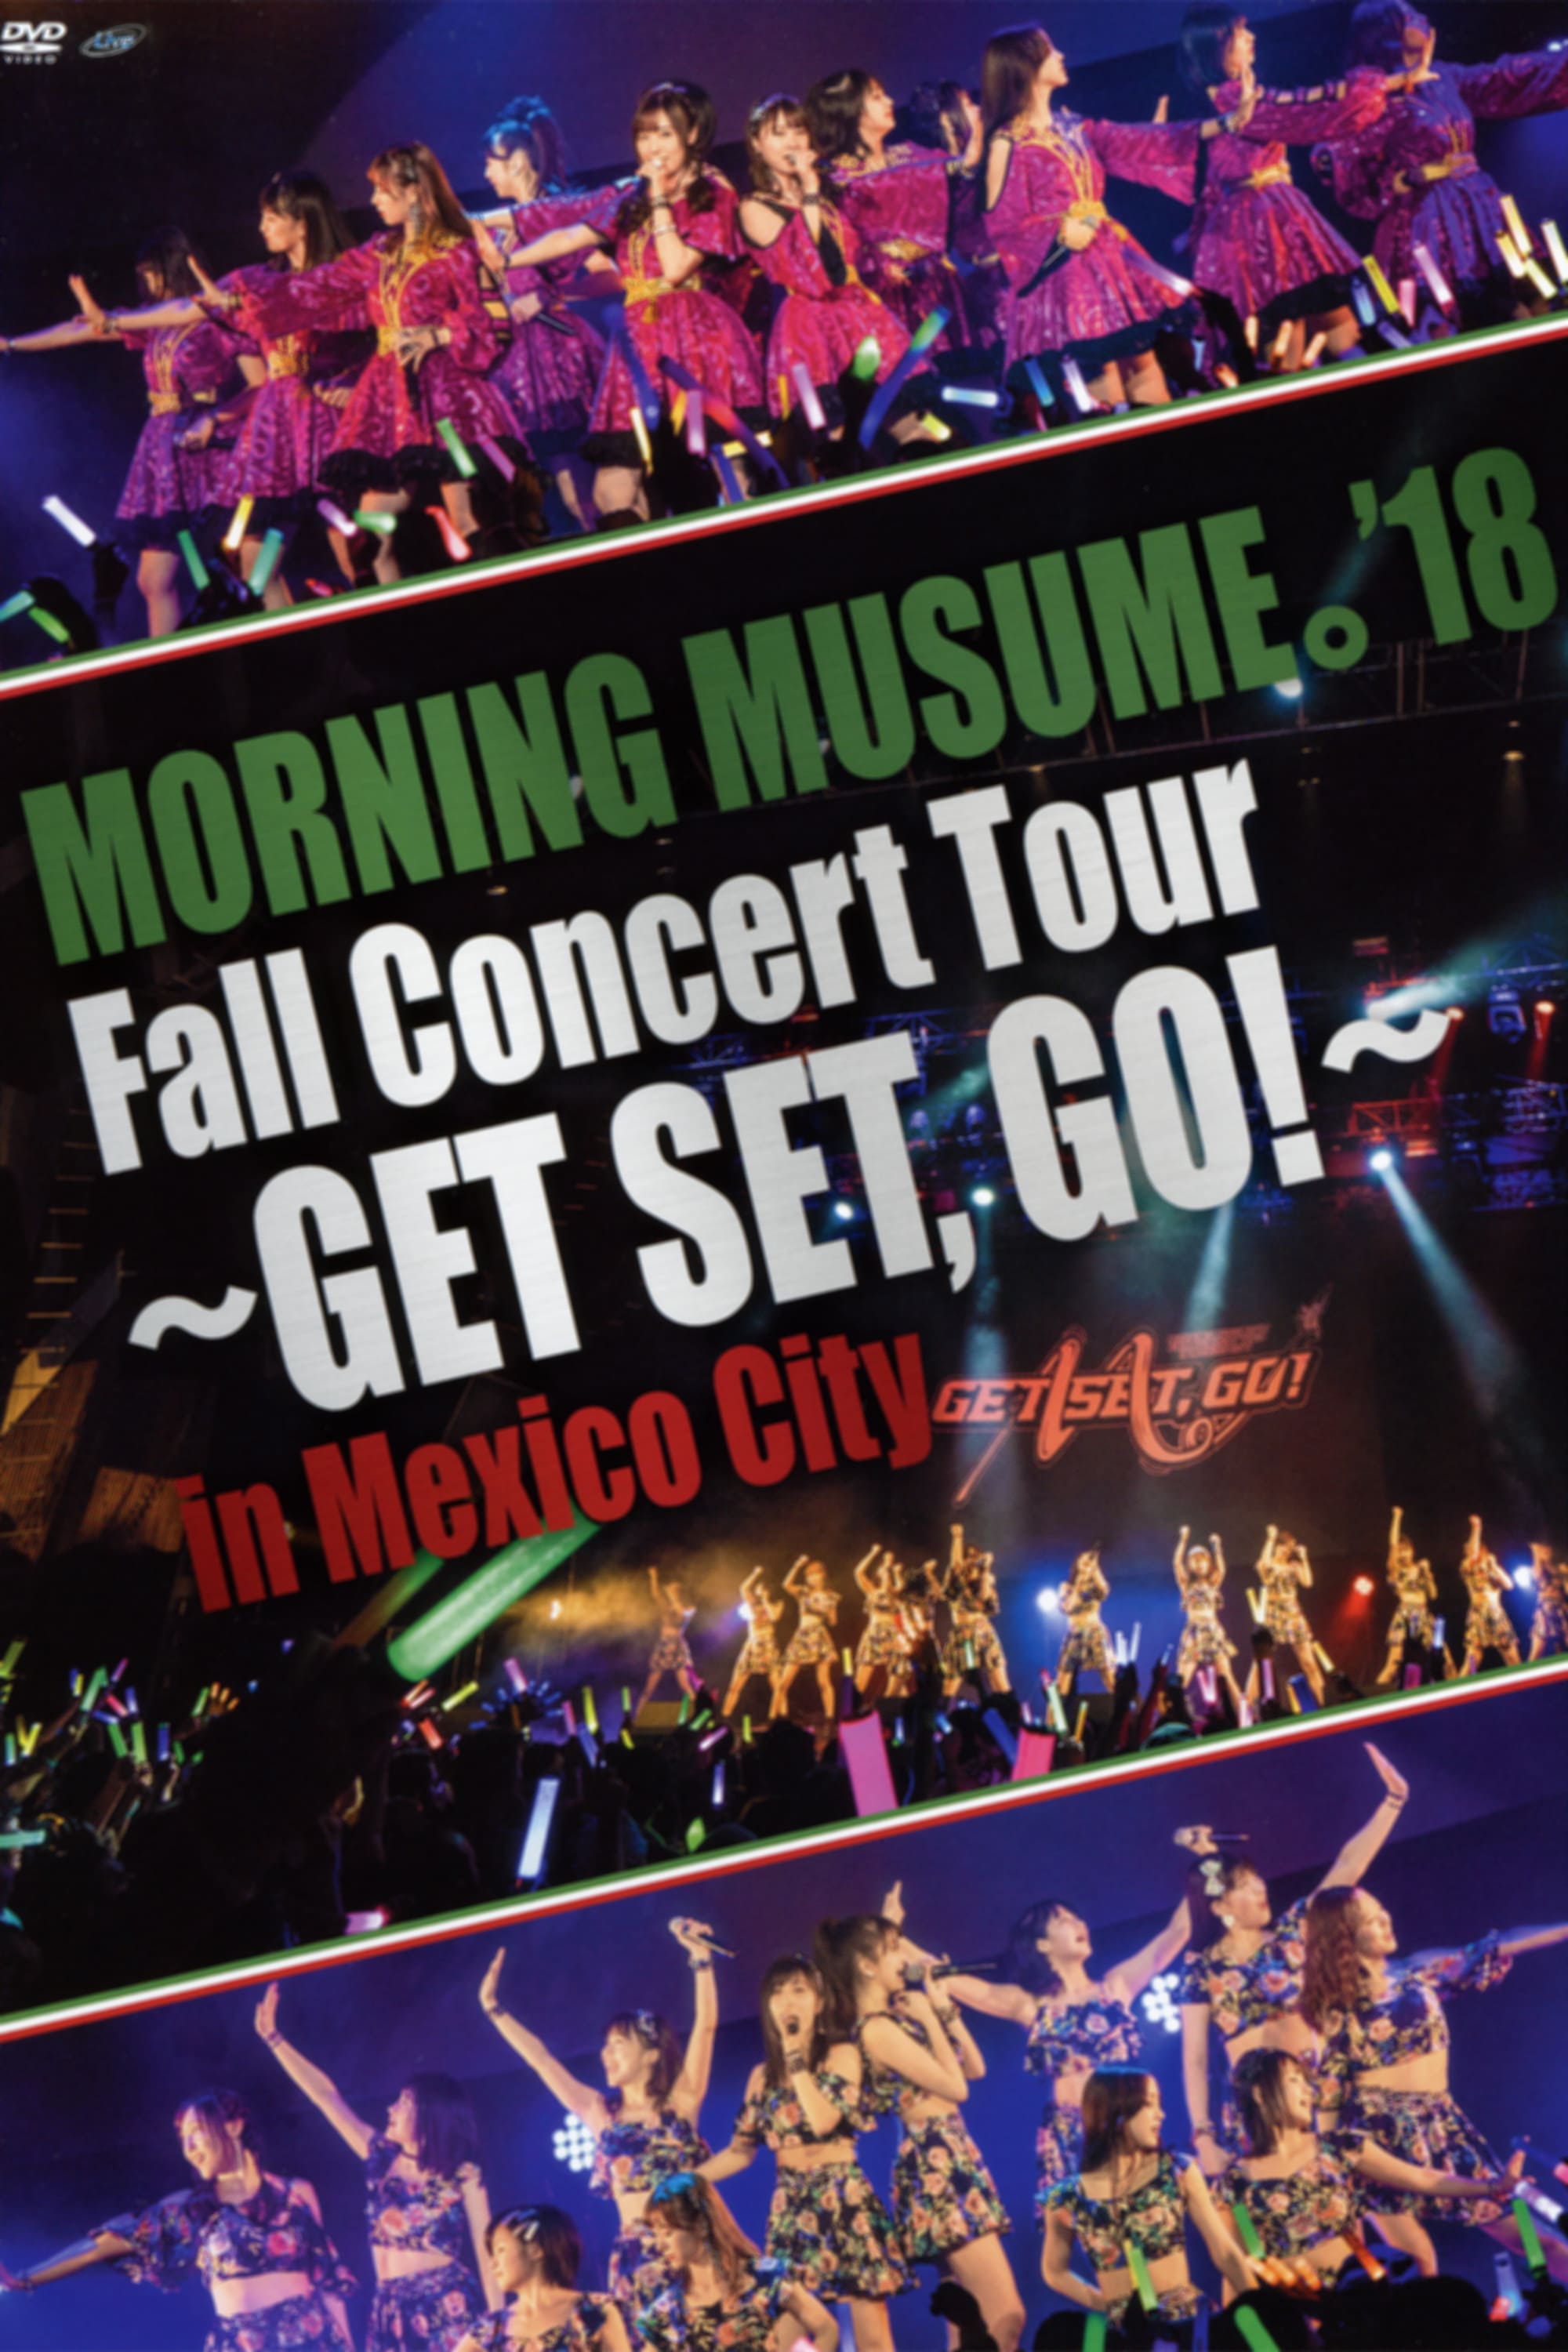 Morning Musume.'18 Live Concert in Mexico City